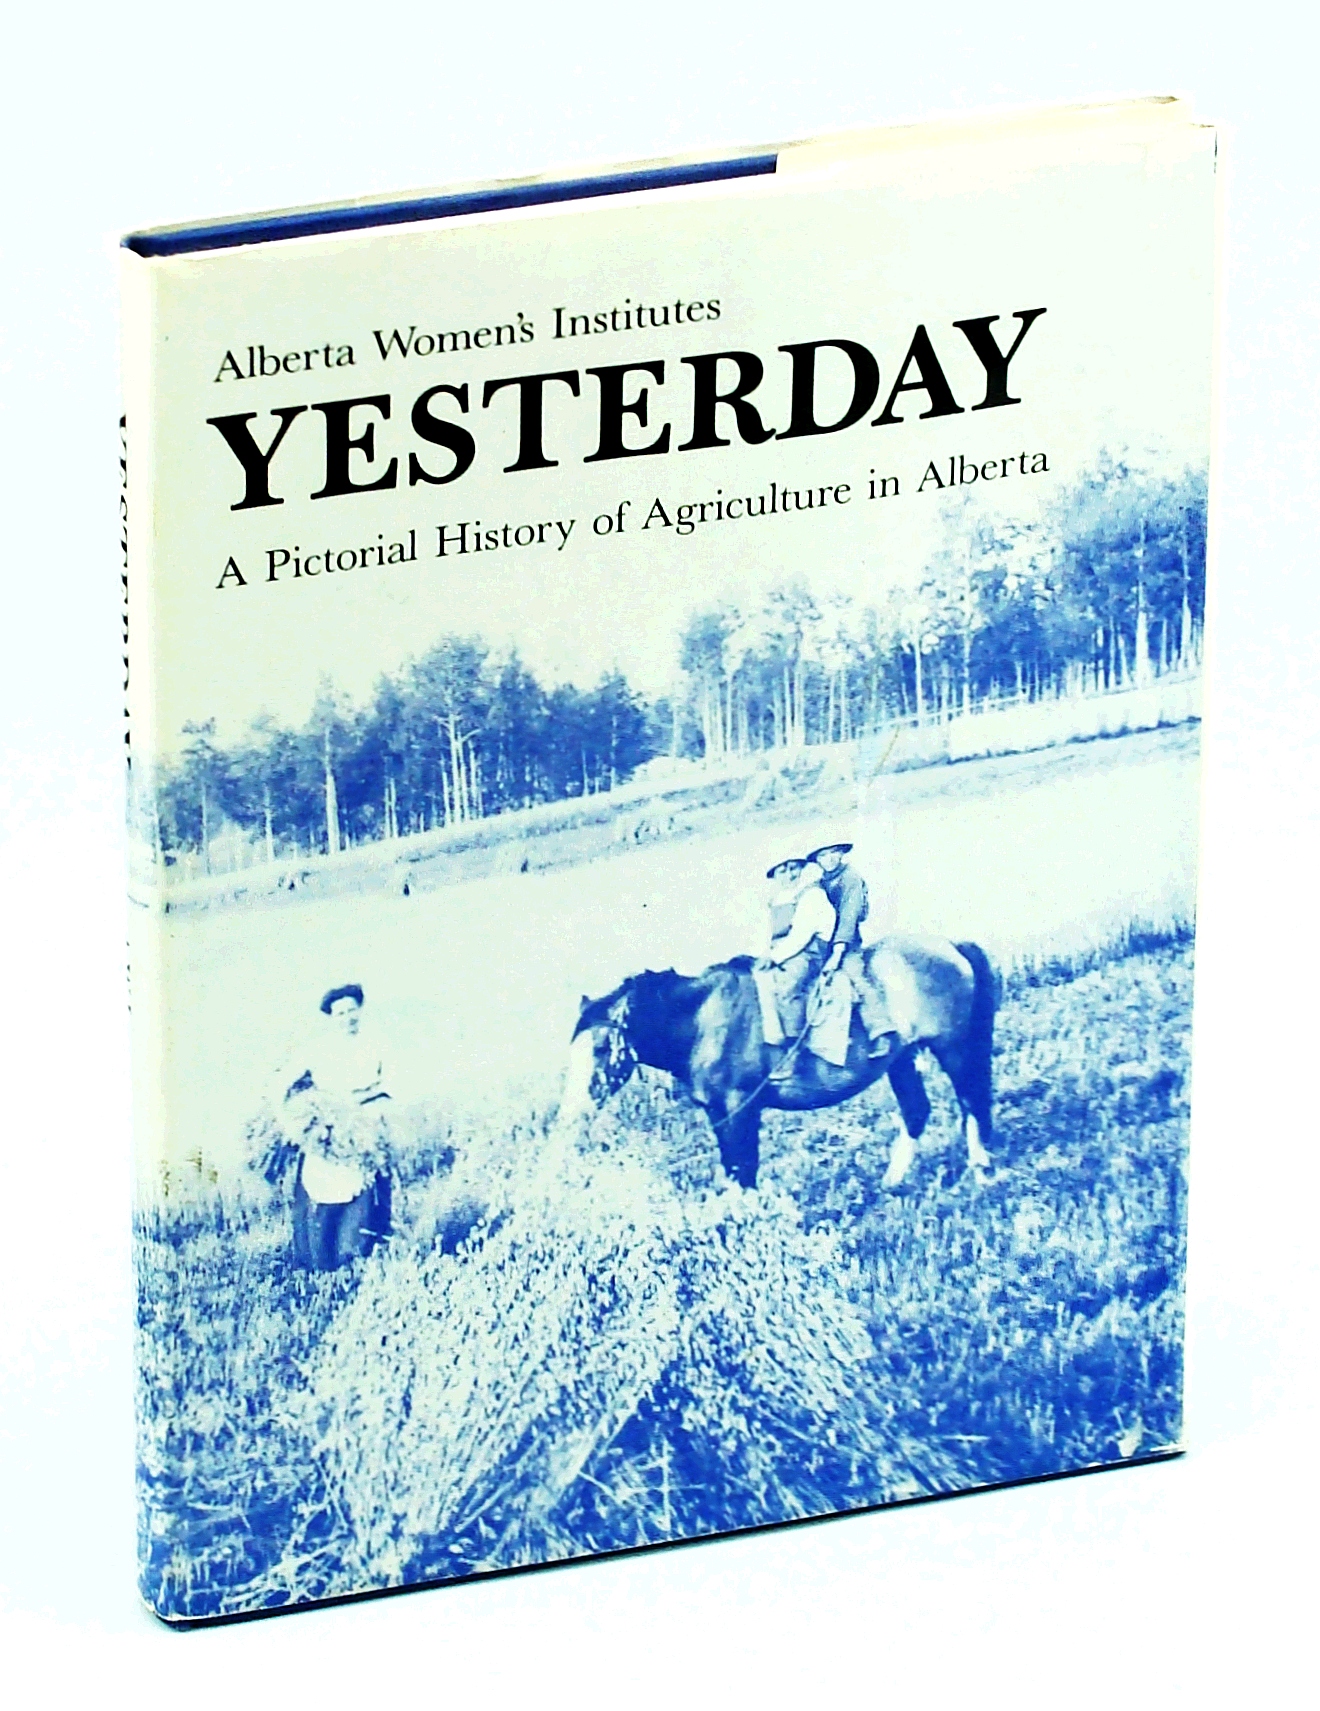 Image for Yesterday: A Pictorial History of Agriculture in Alberta